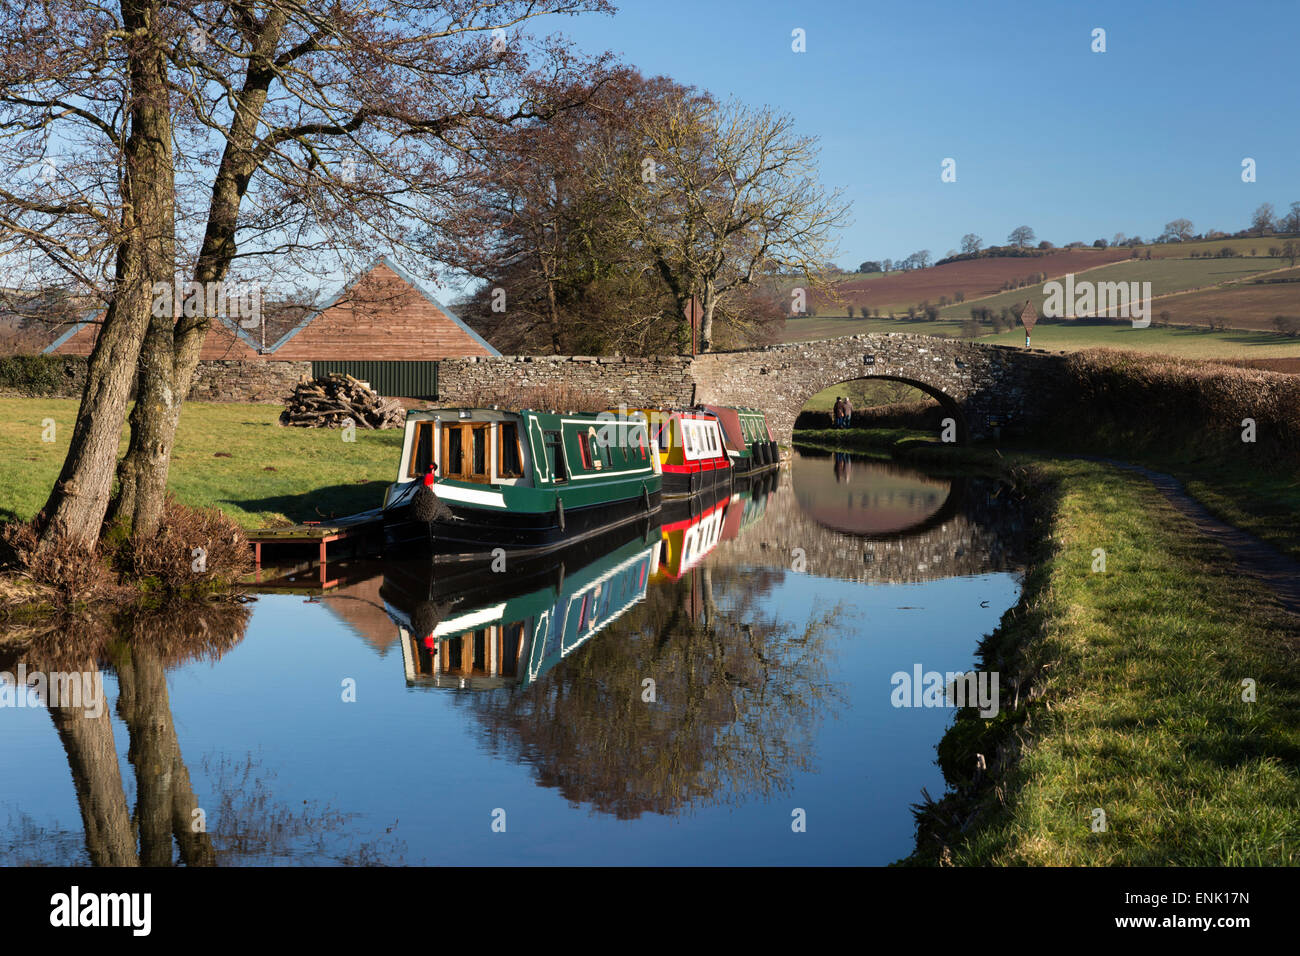 Barges on the Monmouthshire and Brecon Canal, Pencelli, Brecon Beacons National Park, Powys, Wales, United Kingdom, Europe Stock Photo